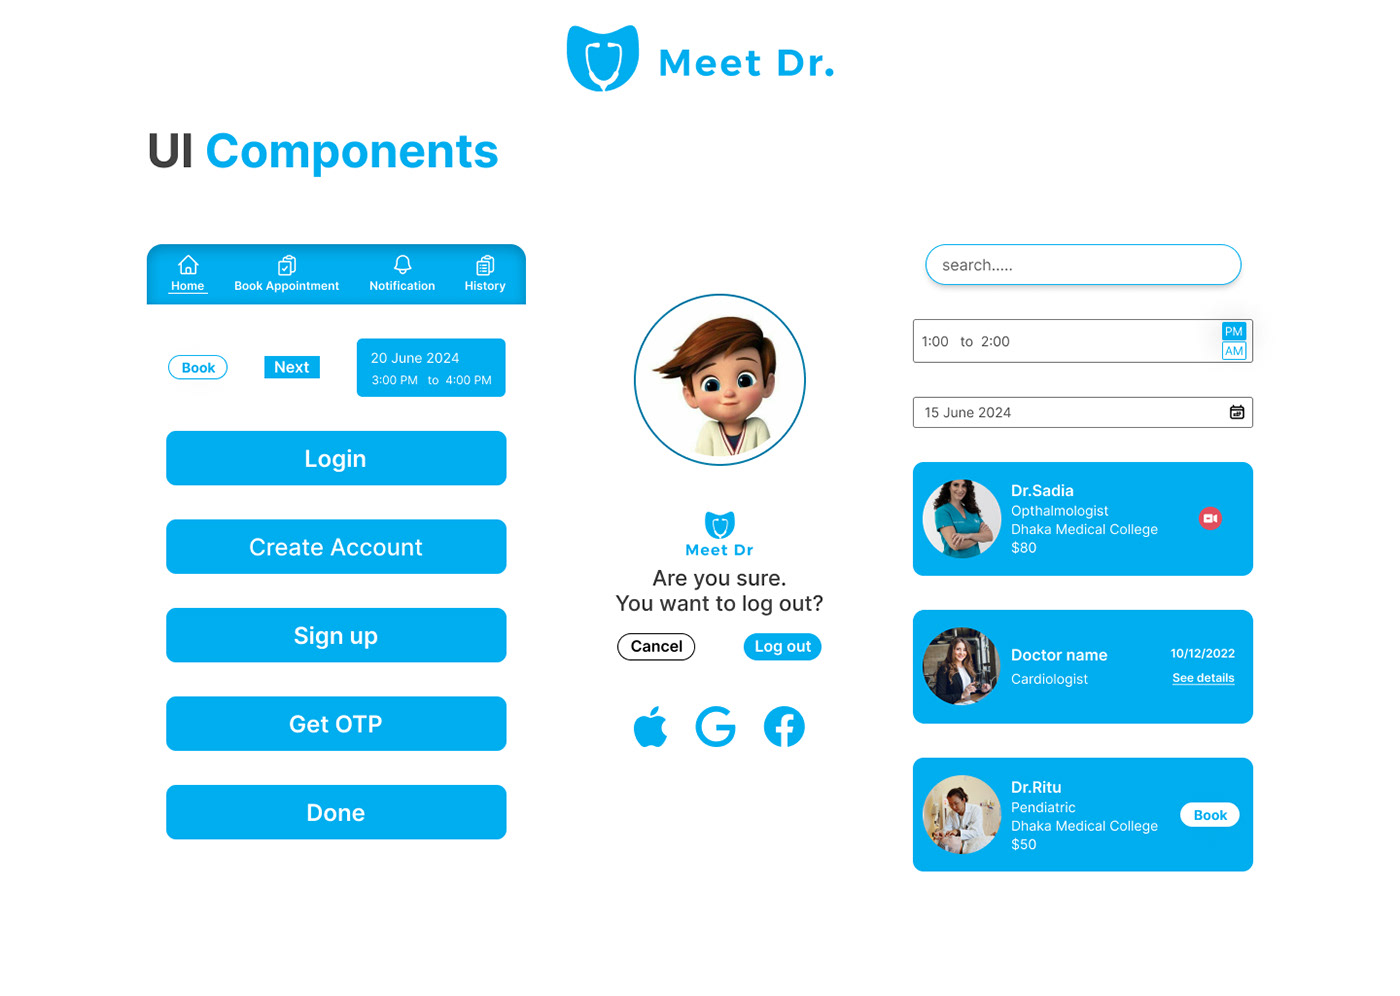 This app shows us an UI components for Dr. appointment app.